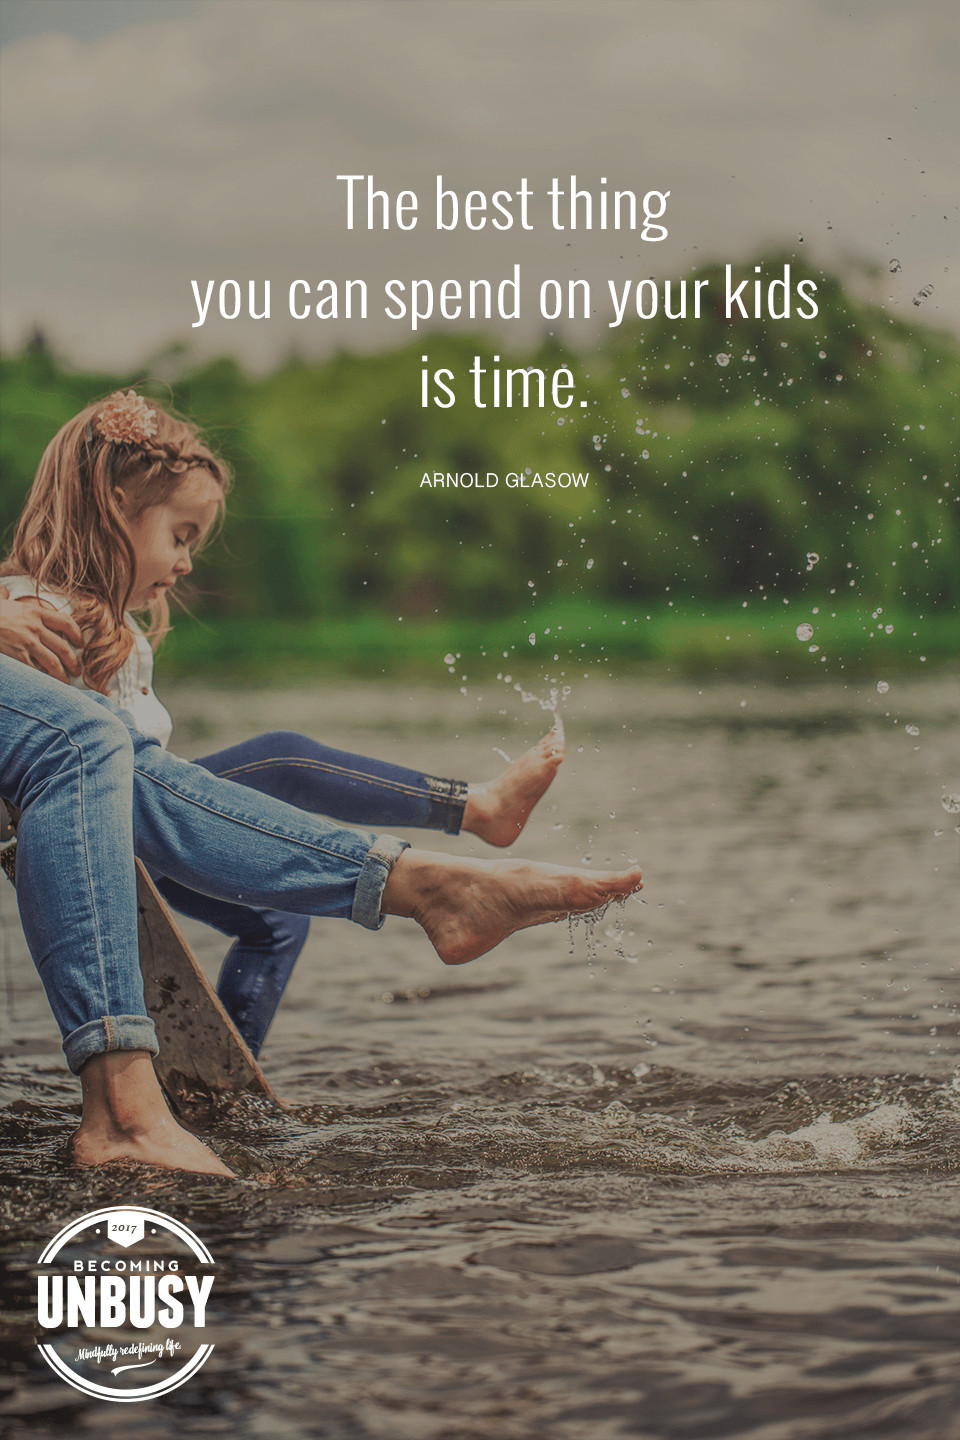 Spending Time With Children Quotes
 The best thing you can spend on your kids is time Yes